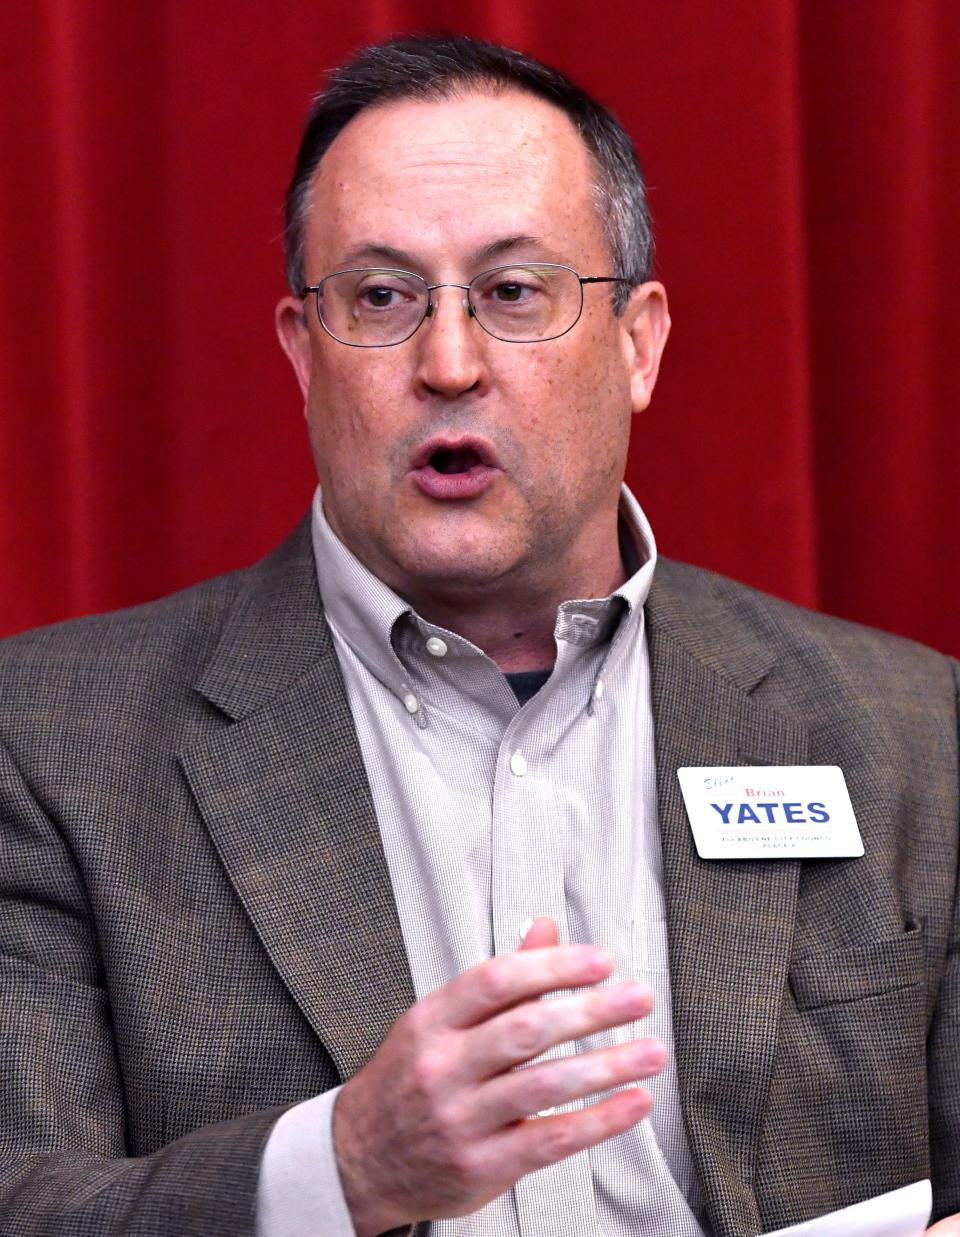 Brian Yates, who is opposing Scott Beard for council, said he would not comment on his opponent's IRS issue.